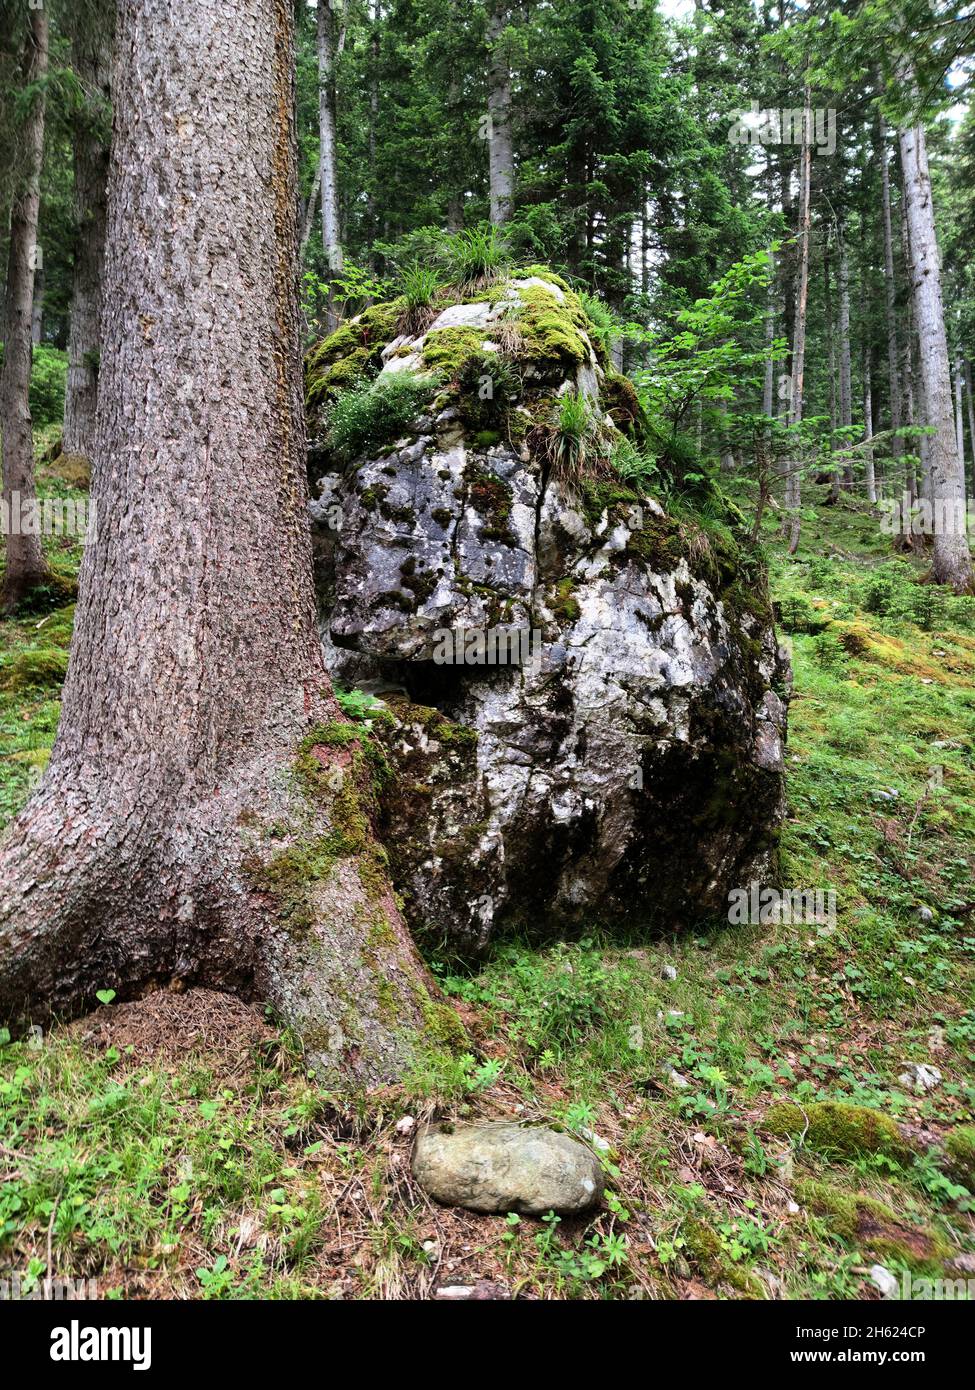 a huge rock bears witness to an earlier landslide in the mountain forest Stock Photo